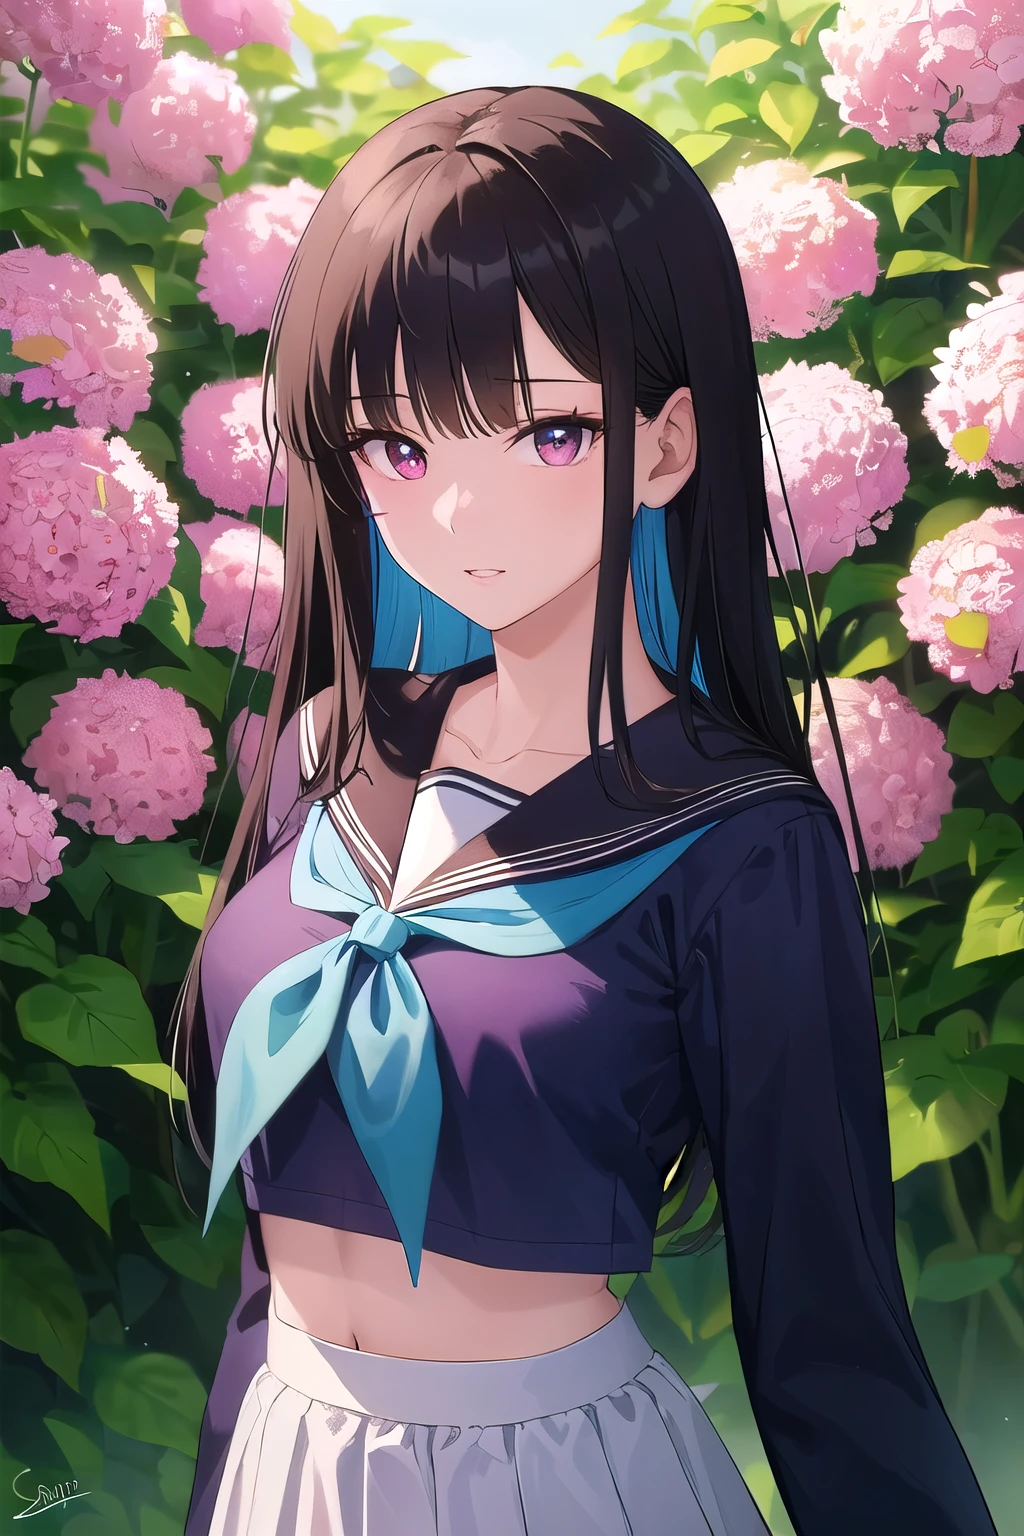 A girl in a garden, (best quality, highres, masterpiece:1.2), with ASNATSU, SERAFUKU, wearing a WHITE SKIRT and LONG SLEEVES. She is also wearing a NECKERCHIEF and has a BLACK SKIRT. Her eyes are beautiful and detailed, with long eyelashes. She has beautiful and detailed lips. The garden is filled with vibrant flowers and lush greenery. The lighting is soft and dreamy, casting a warm glow on the scene. The image should have ultra-detailed elements, capturing every minute detail. The style should be a mixture of portrait and concept artists, creating a unique and artistic atmosphere. The color tone should be fresh and bright, highlighting the beauty of the garden and the girl's outfit. midriff peek